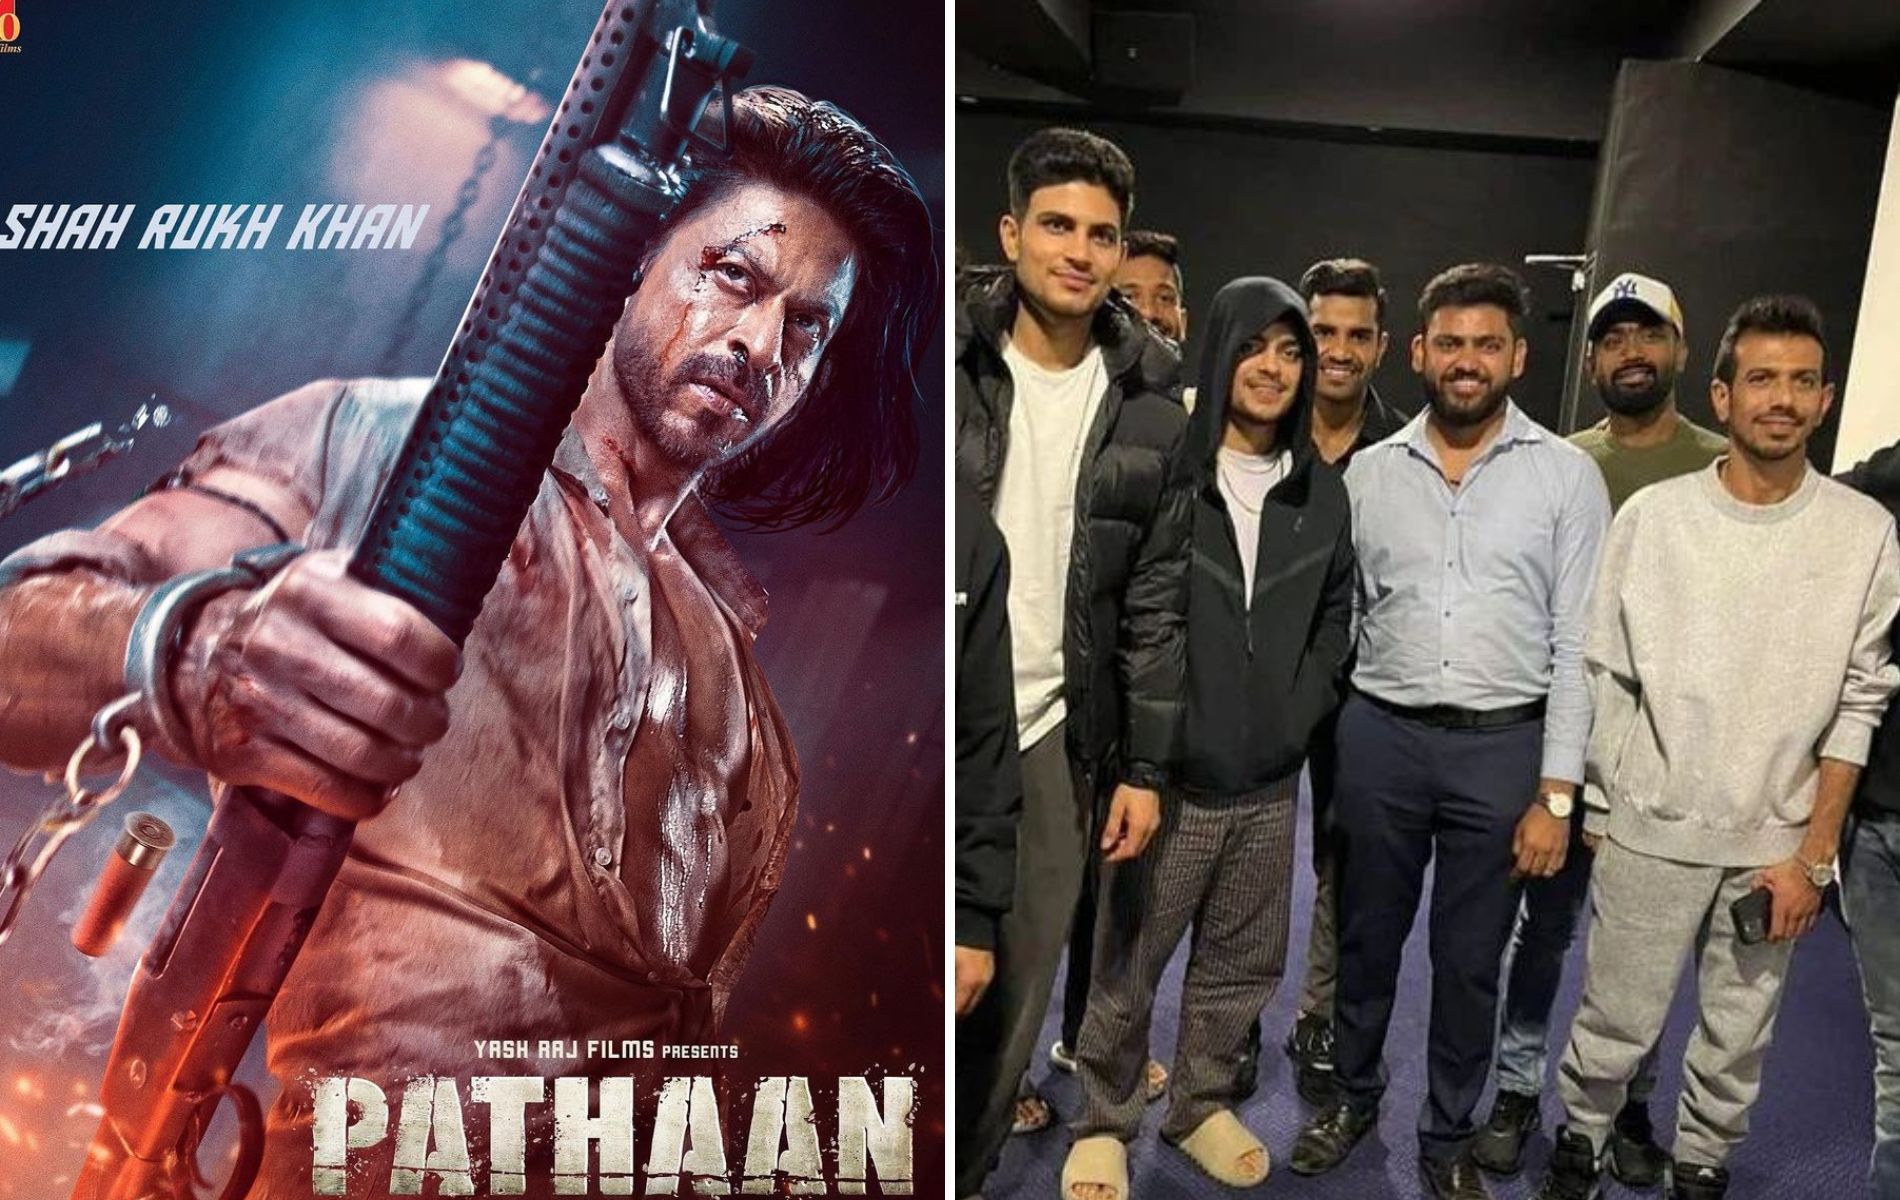 Team India stars (R) at a screening a of Pathaan. (Pics: Instagram)